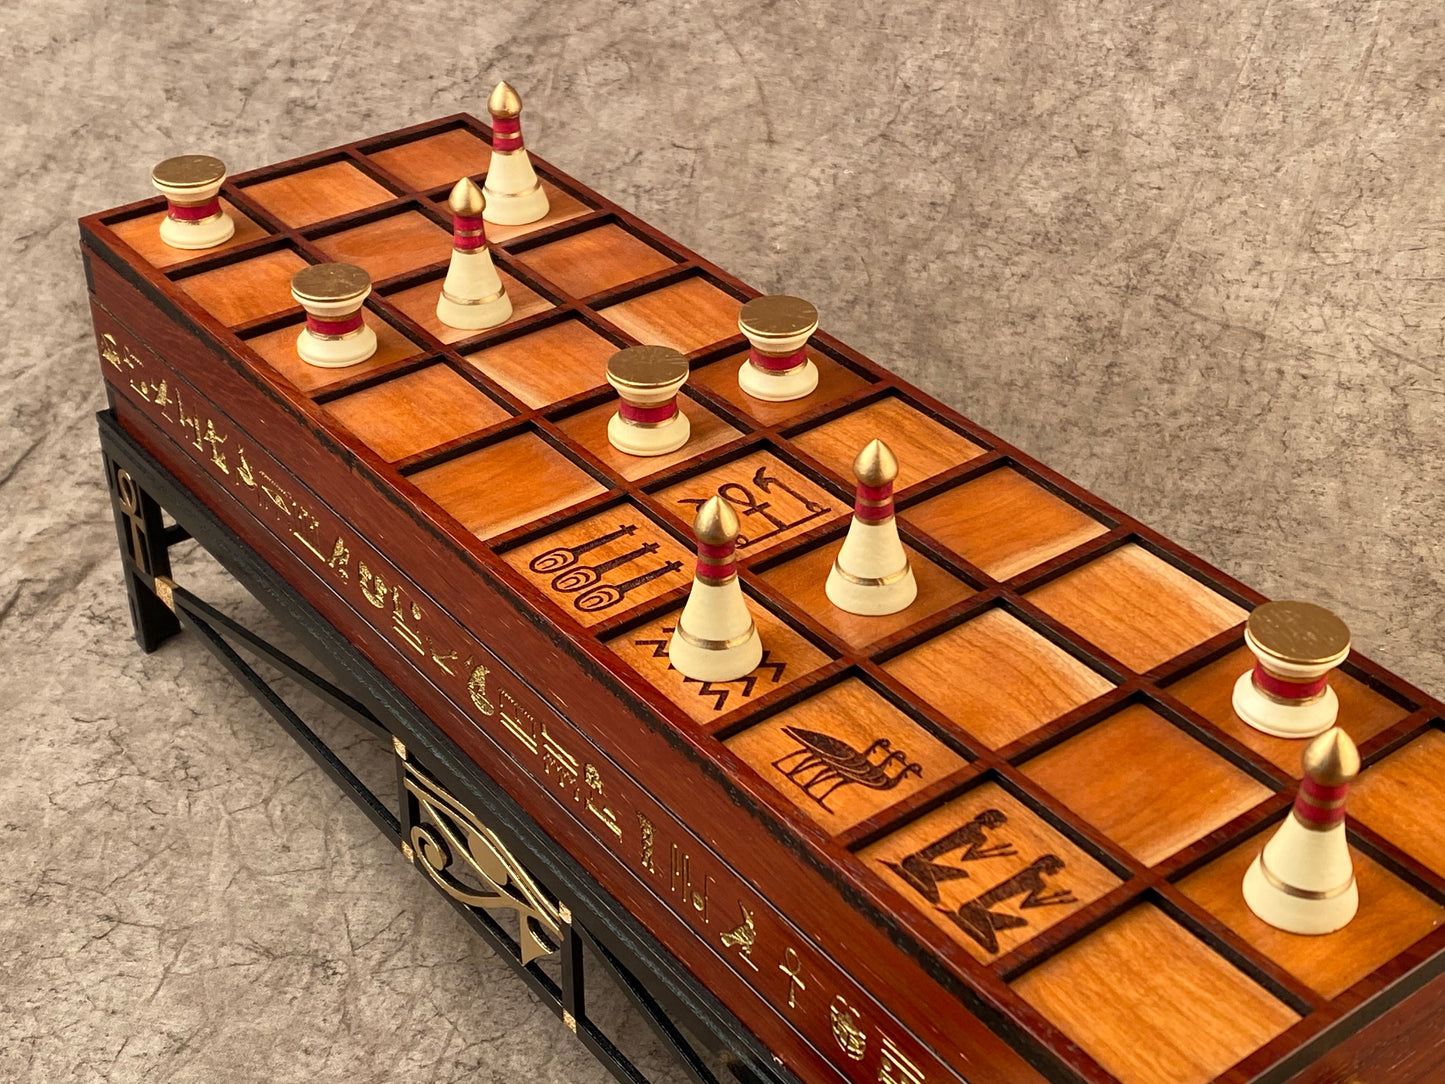 The Pharaoh's SENET Game. The finest Ancient Egyptian SENET Board in the World! Museum Quality, Hand Made, a finely made Heirloom.